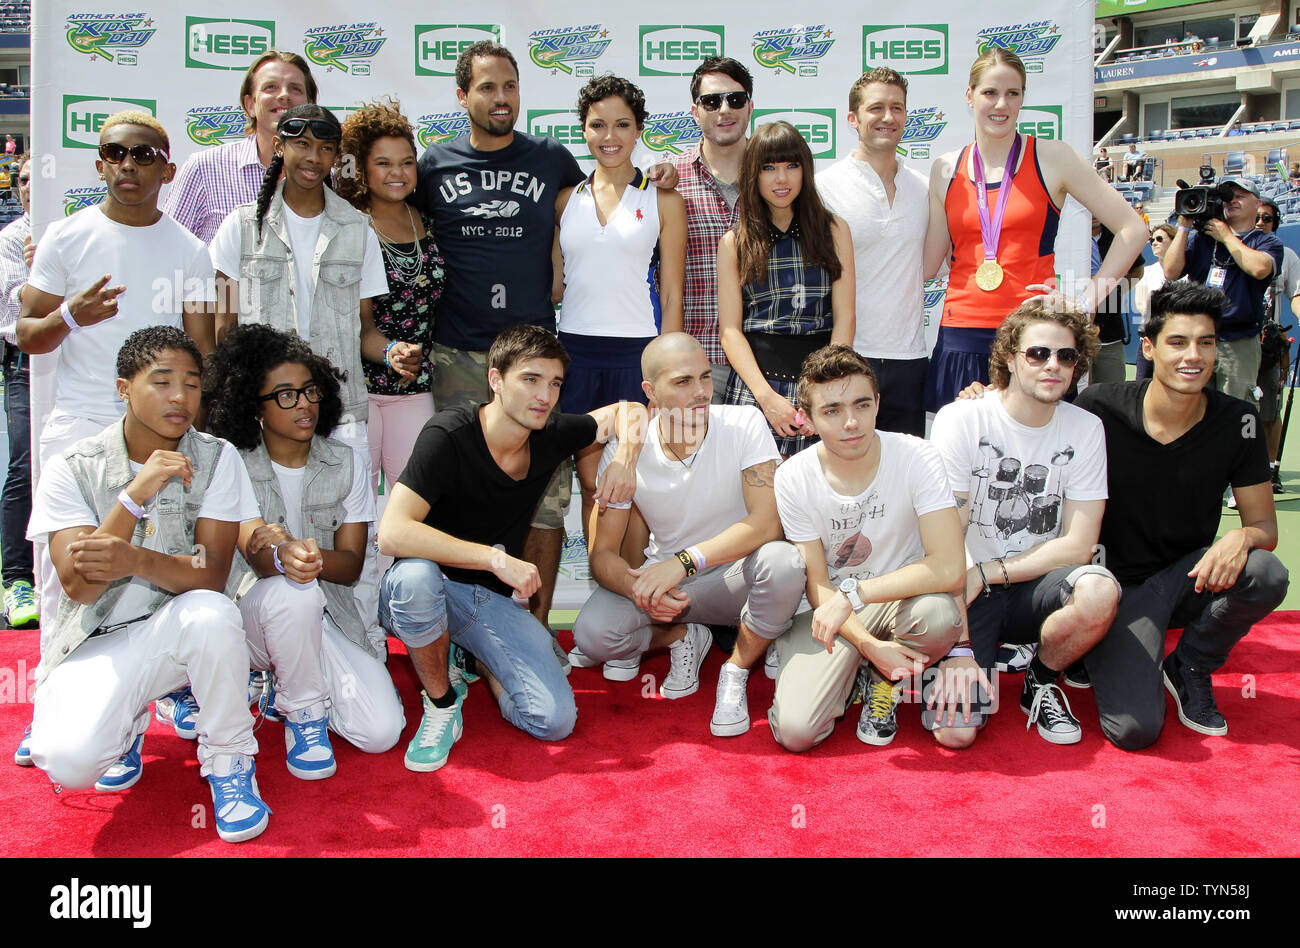 Carly Rae Jepsen, Rachel Crow, members of The Wanted and Mindless Behavior arrive for photos at Arthur Ashe Kids Day in Arthur Ashe Stadium at the U.S. Open Tennis Championships at the Billie Jean King National Tennis Center in New York City on August 25, 2012.       UPI/John Angelillo Stock Photo